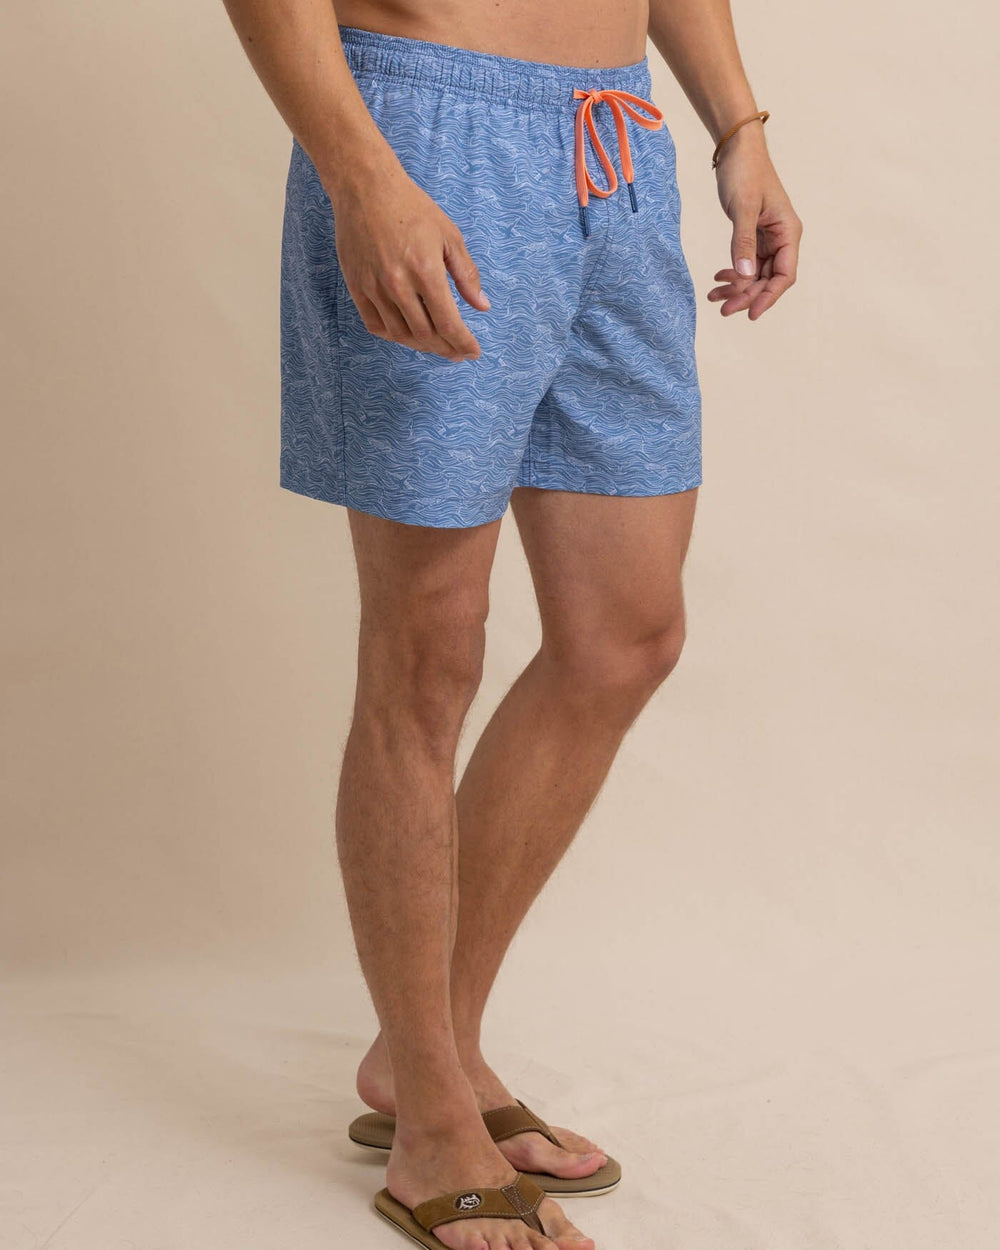 The front view of the Southern Tide The Whaler Swim Trunk by Southern Tide - Coronet Blue